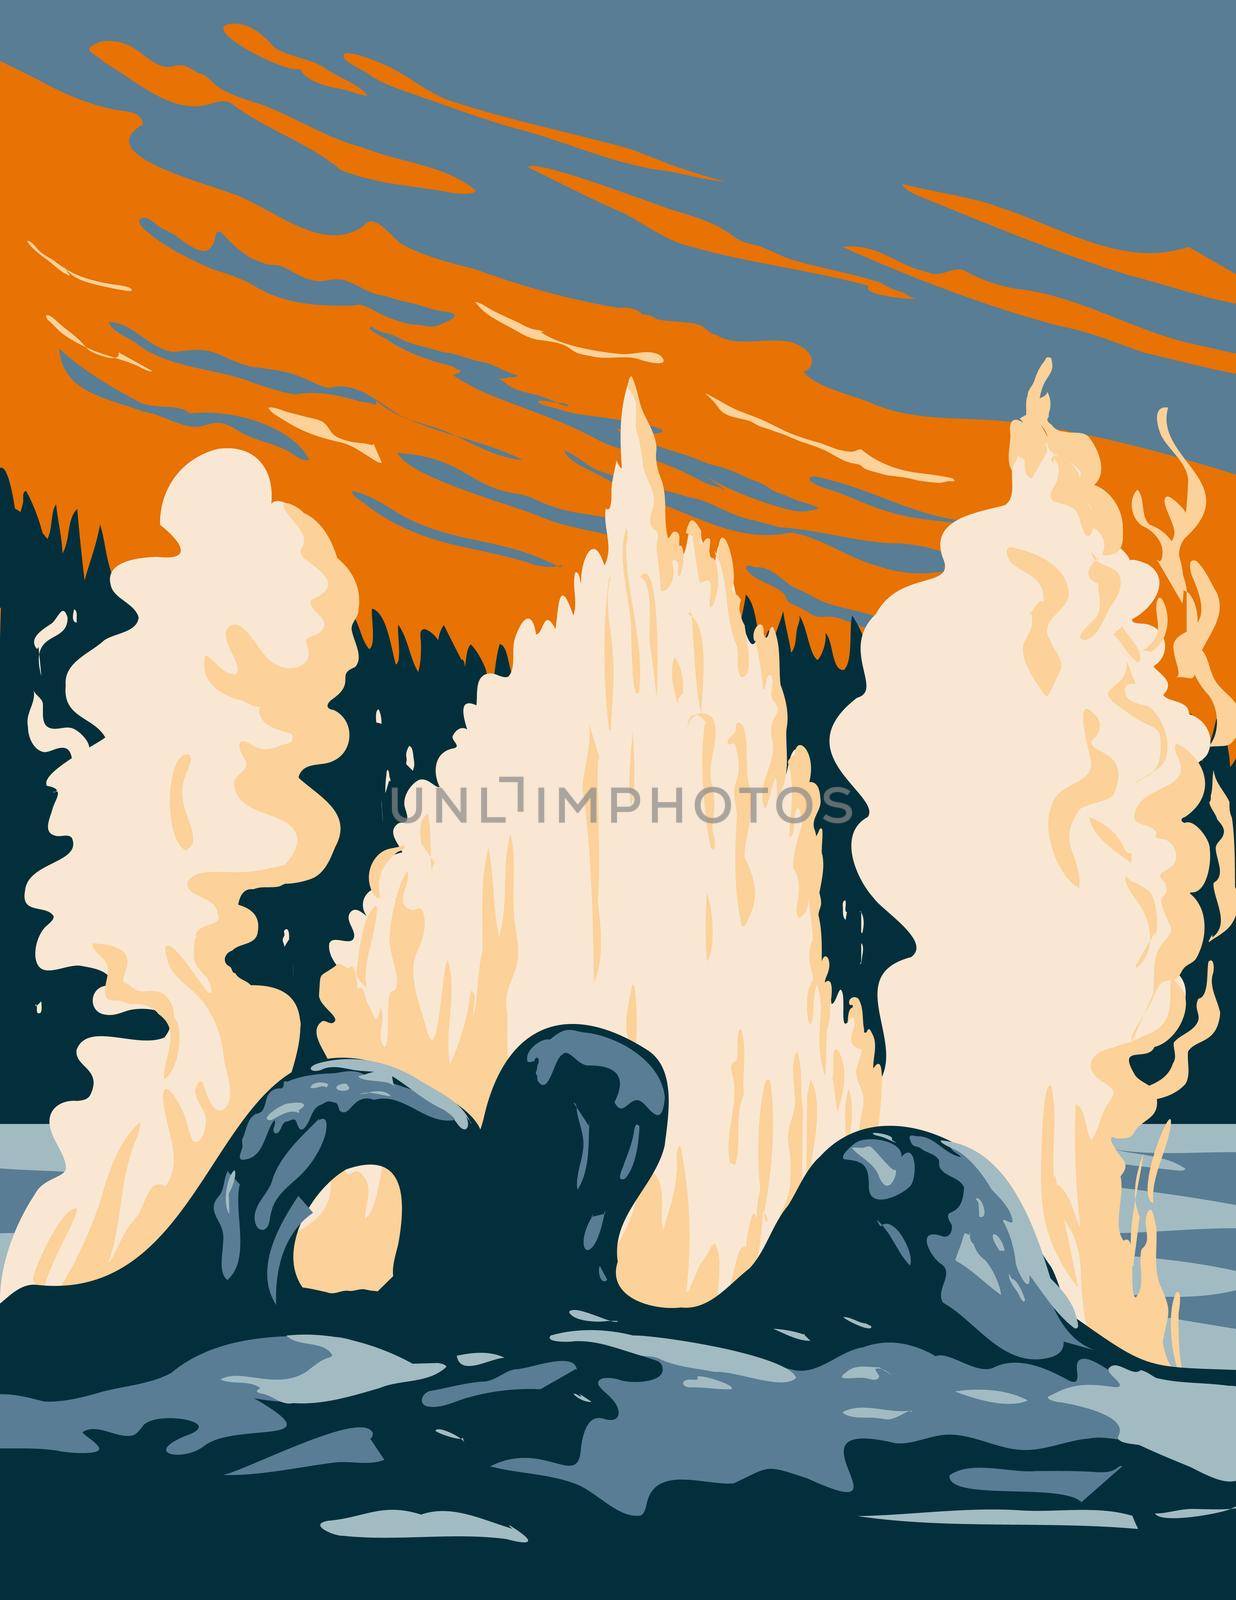 Grotto Geyser a Fountain Type Geyser Located in the Upper Geyser Basin in Yellowstone National Park Teton County Wyoming USA WPA Poster Art by patrimonio